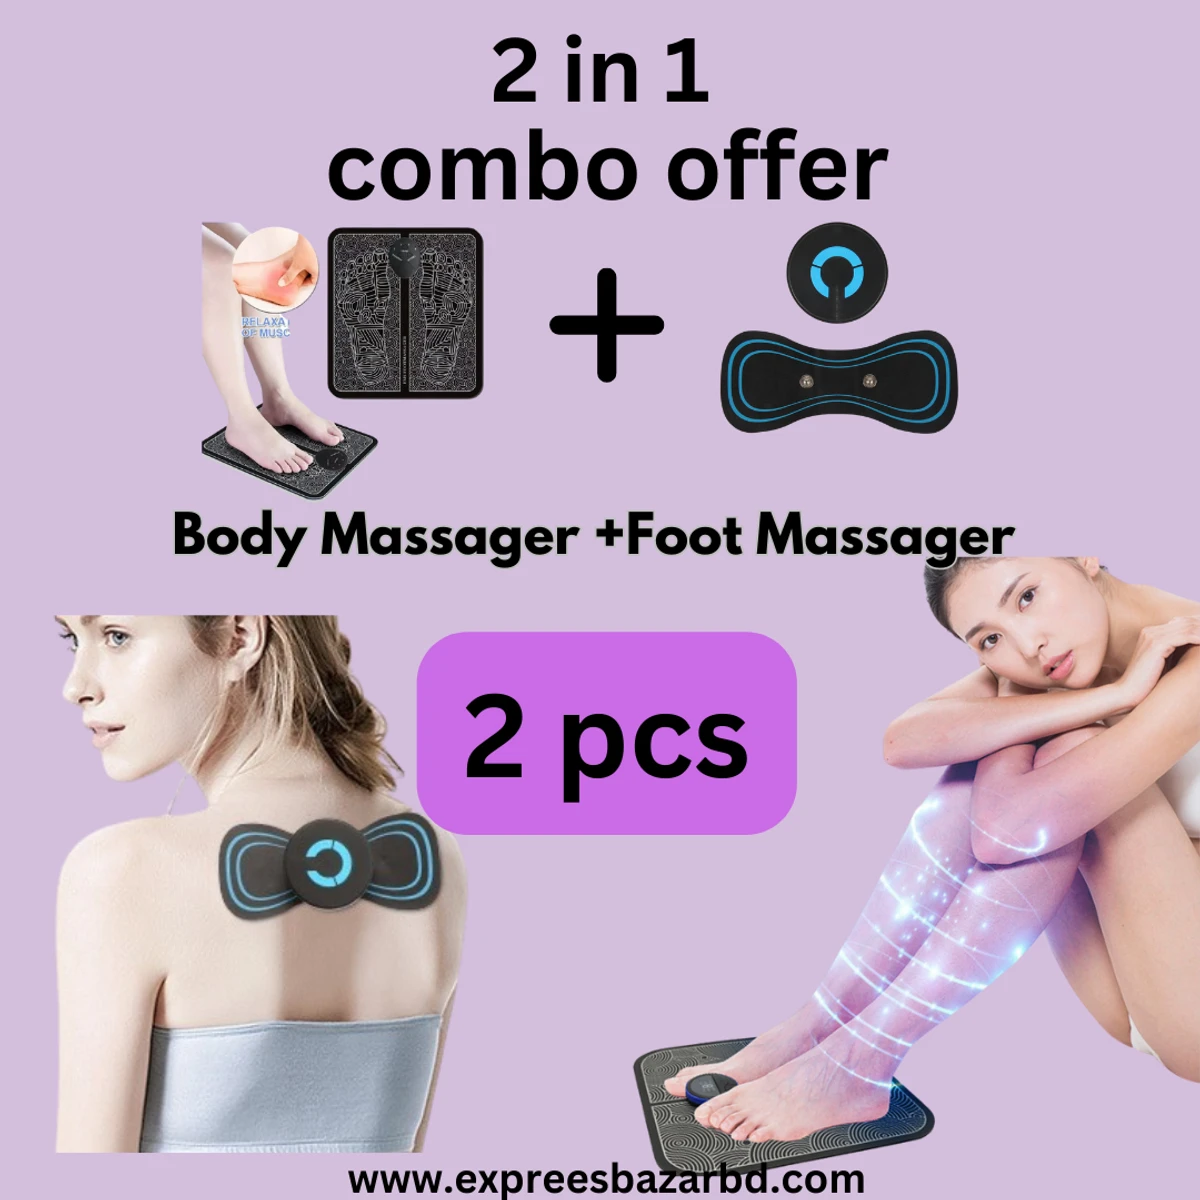 EMS 2 in 1 combo Body Massager + Foot Massager